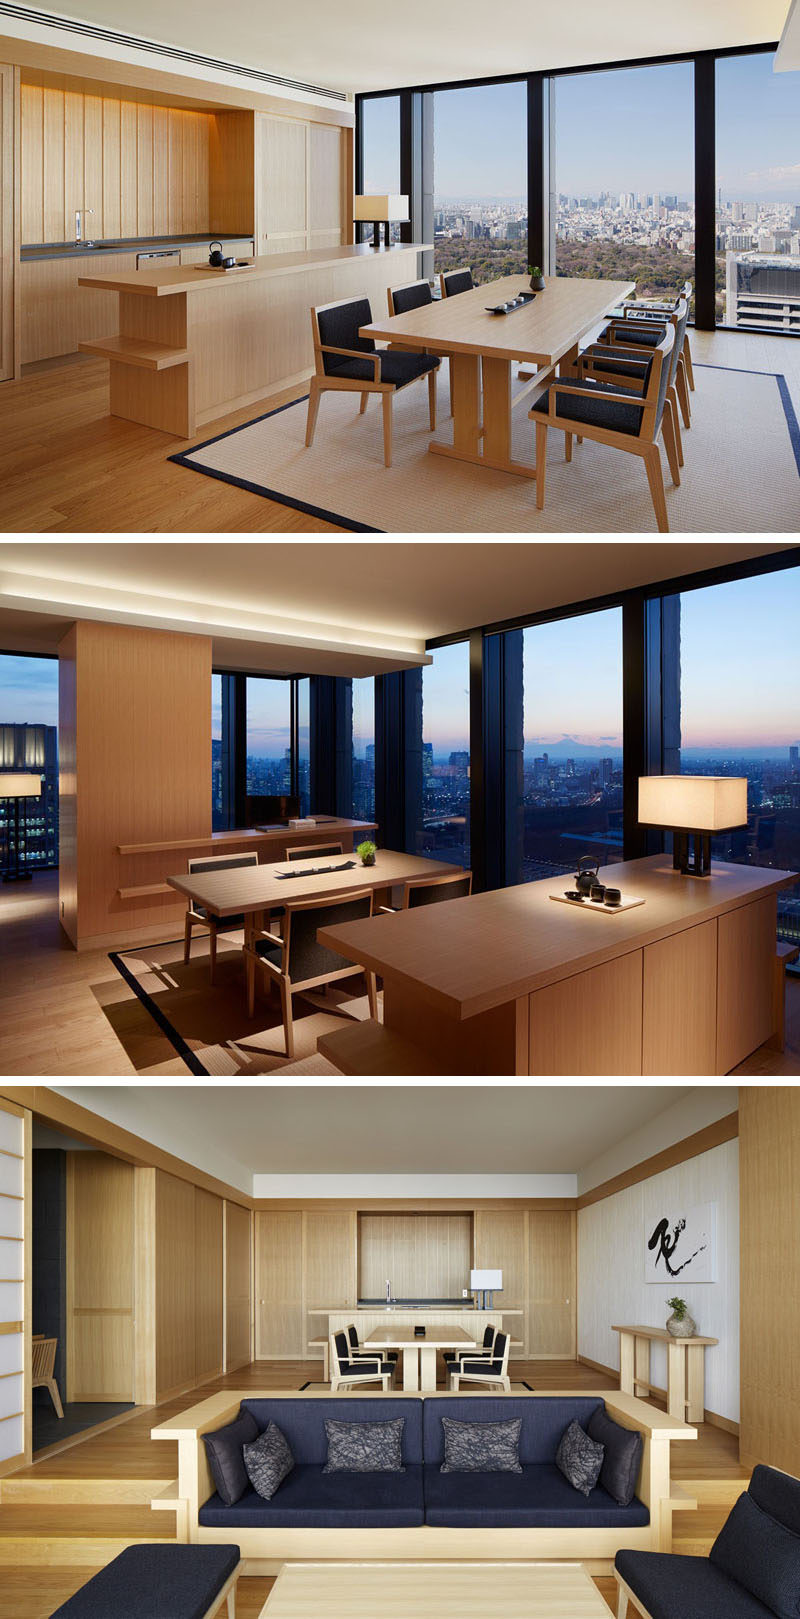 Some of the suites in this Japanese hotel have kitchens, dining rooms and lounges, all with minimal furnishings and picturesque views from the floor-to-ceiling windows.